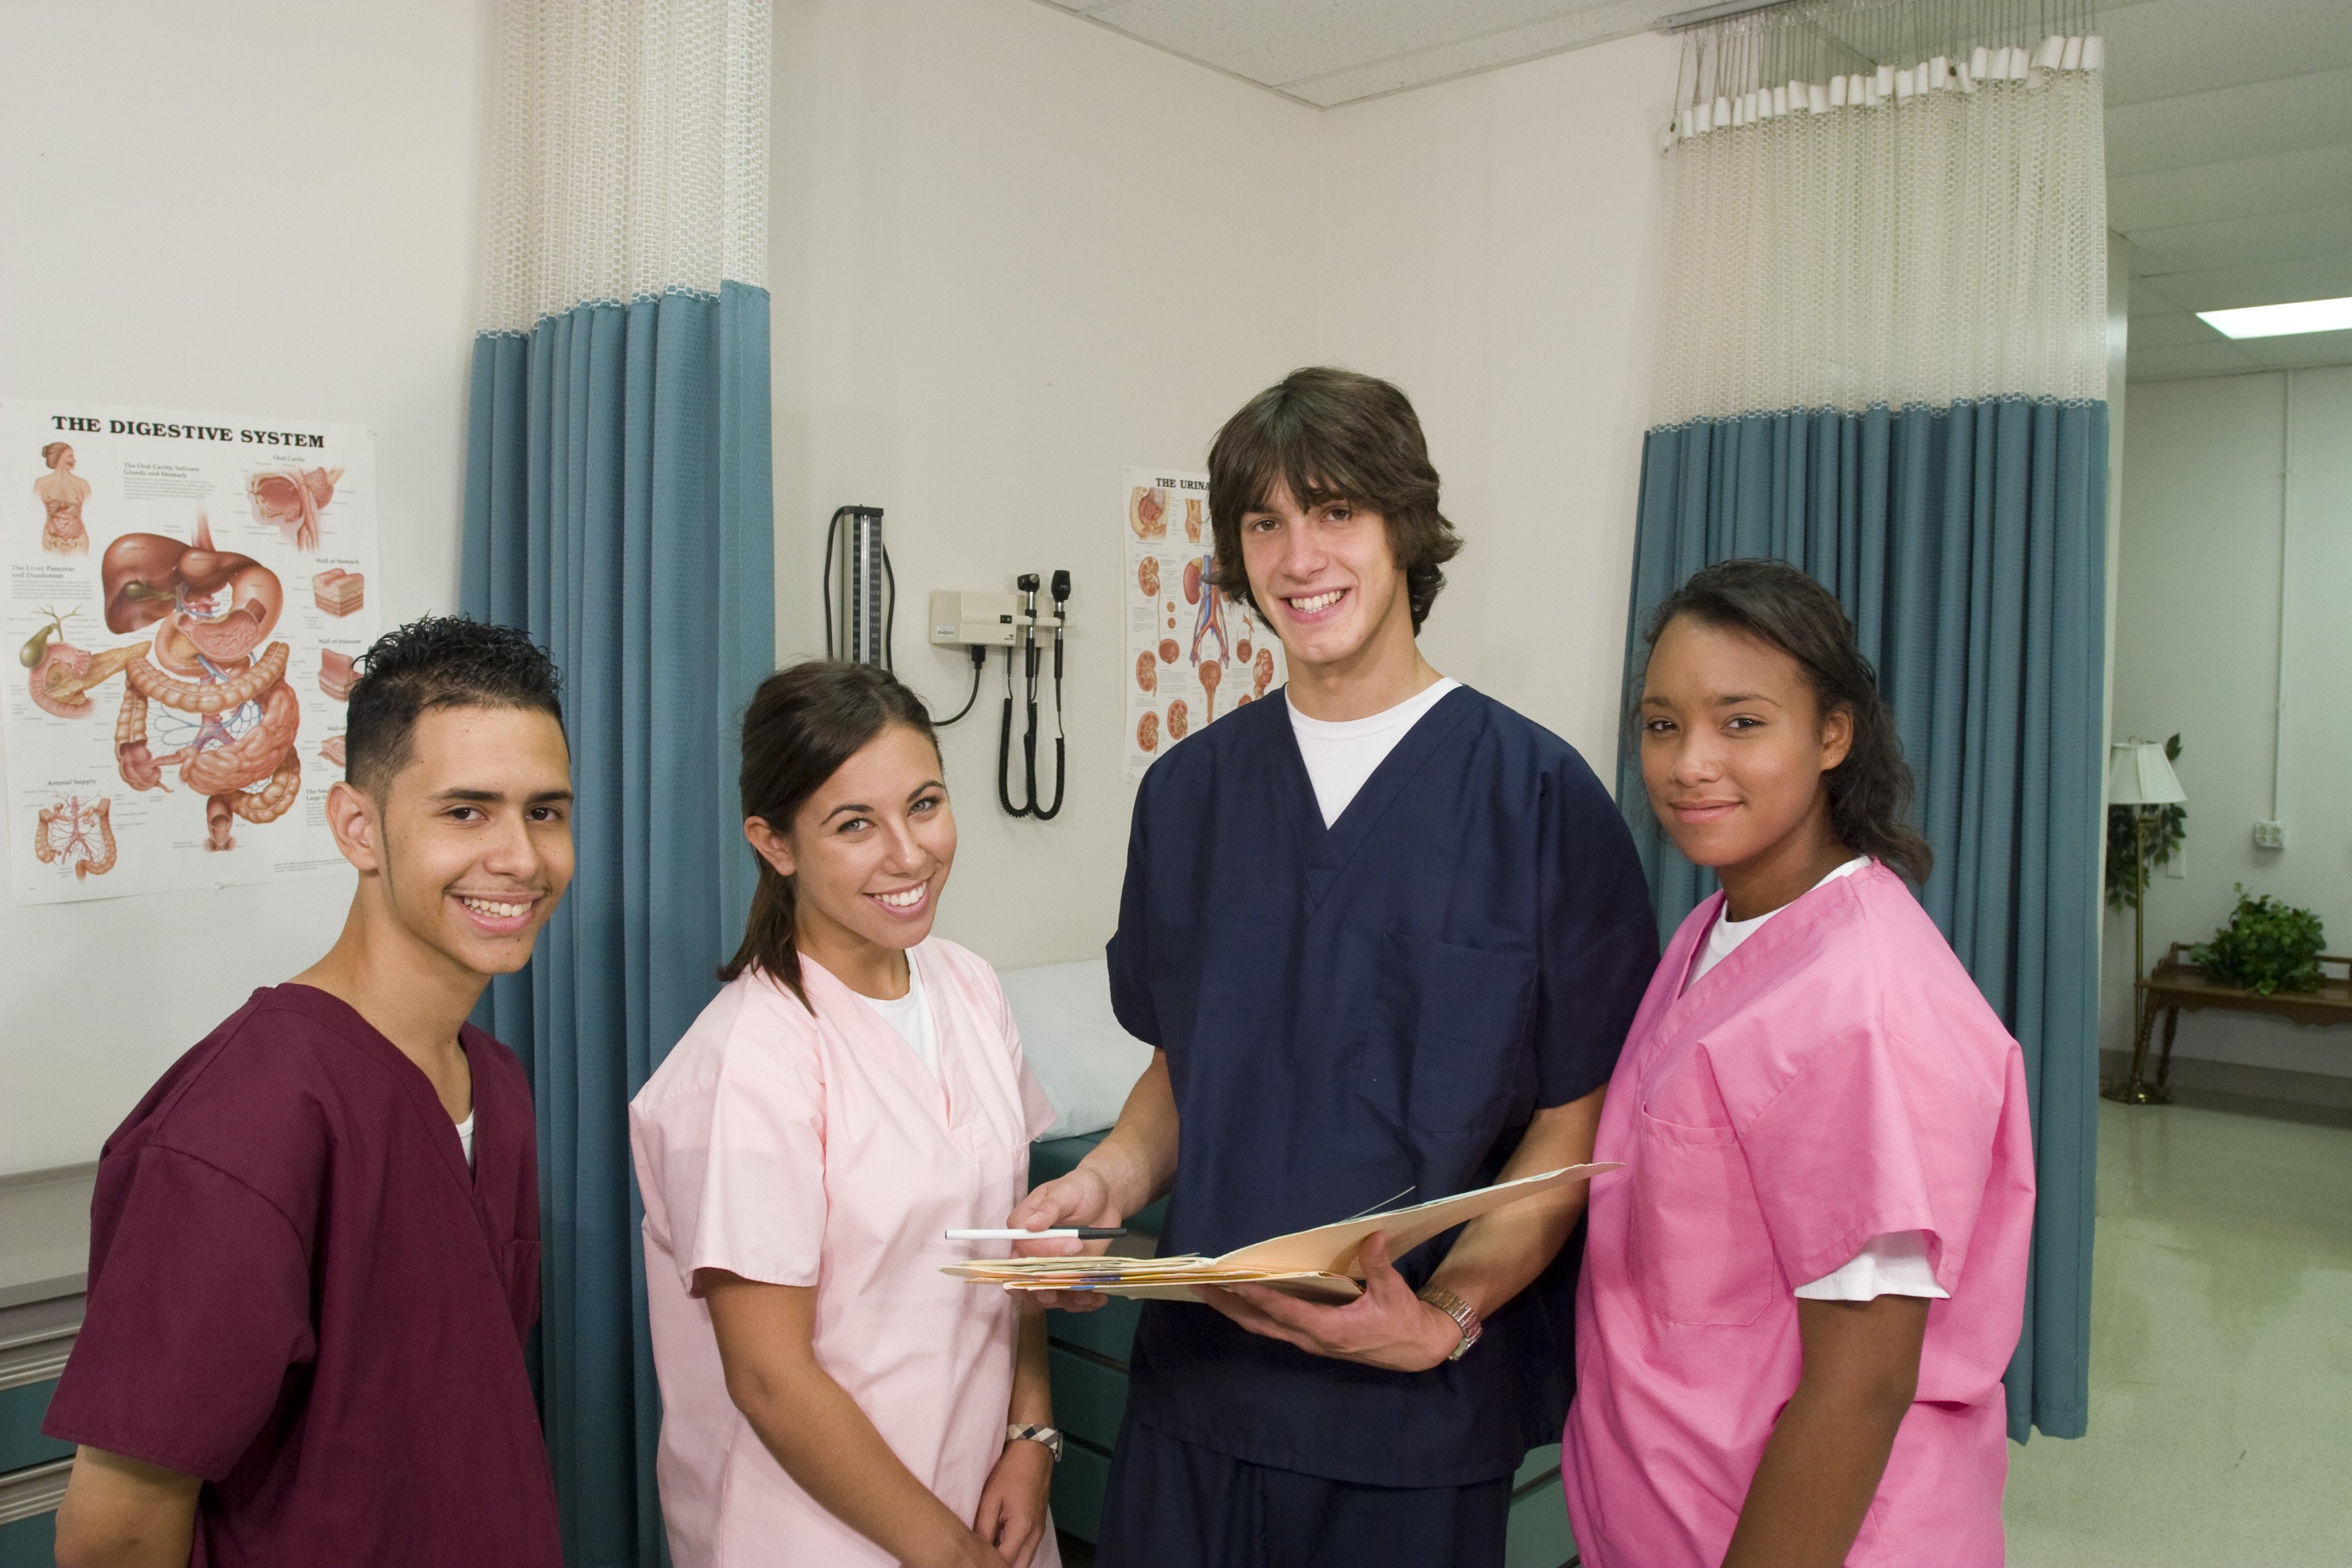 Personal Qualities of a Health Care Worker: Part I